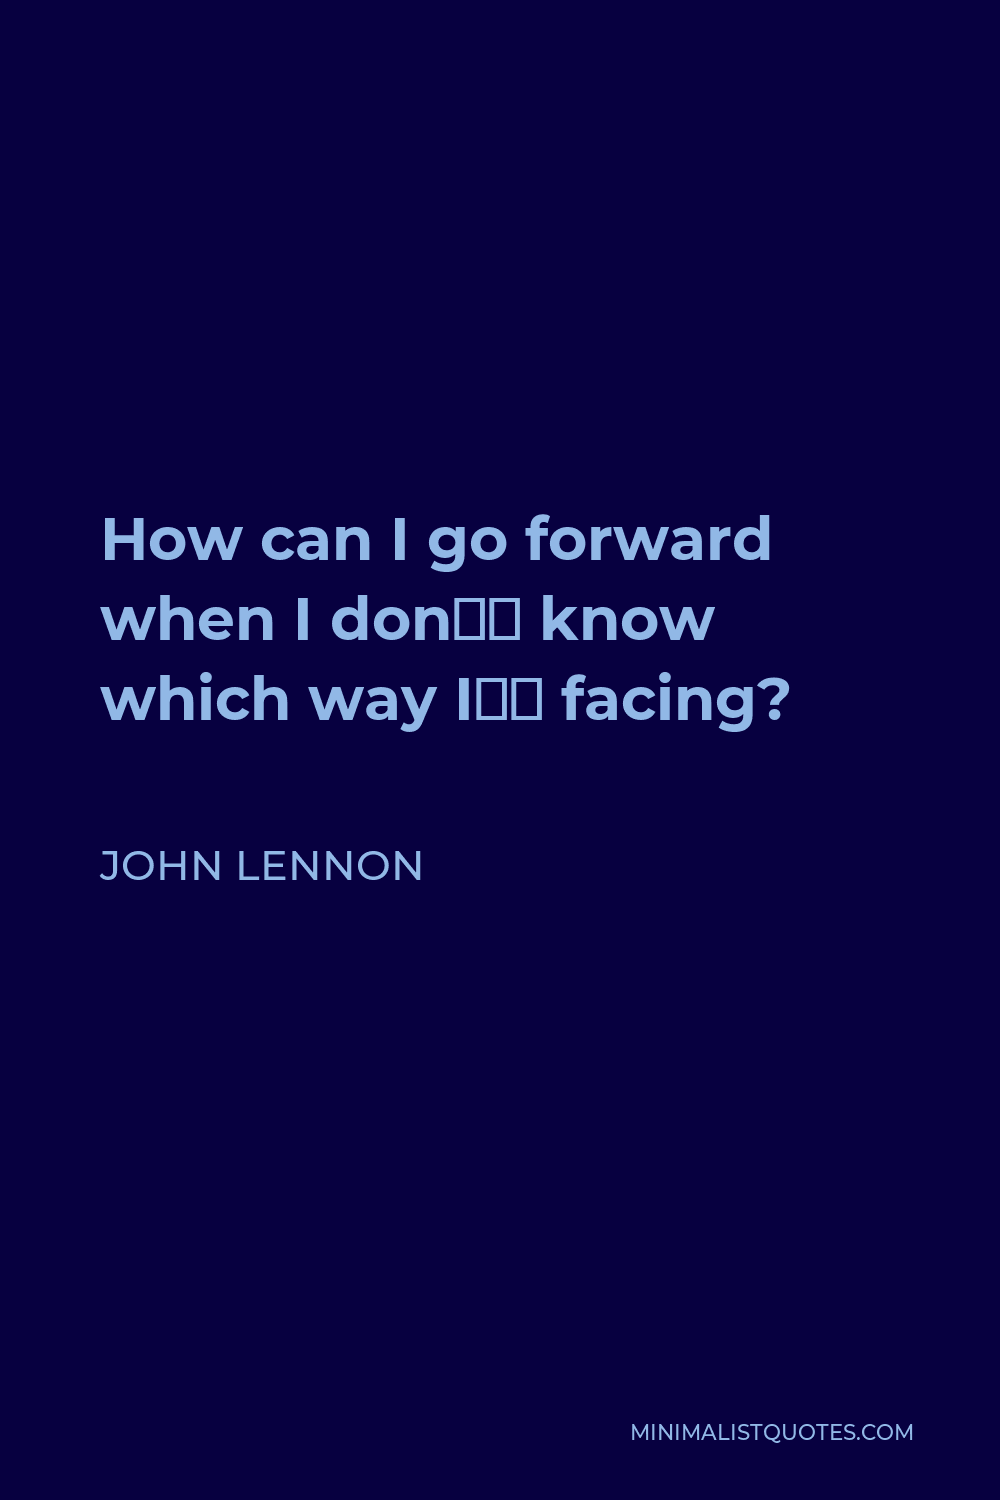 John Lennon Quote - How can I go forward when I don’t know which way I’m facing?